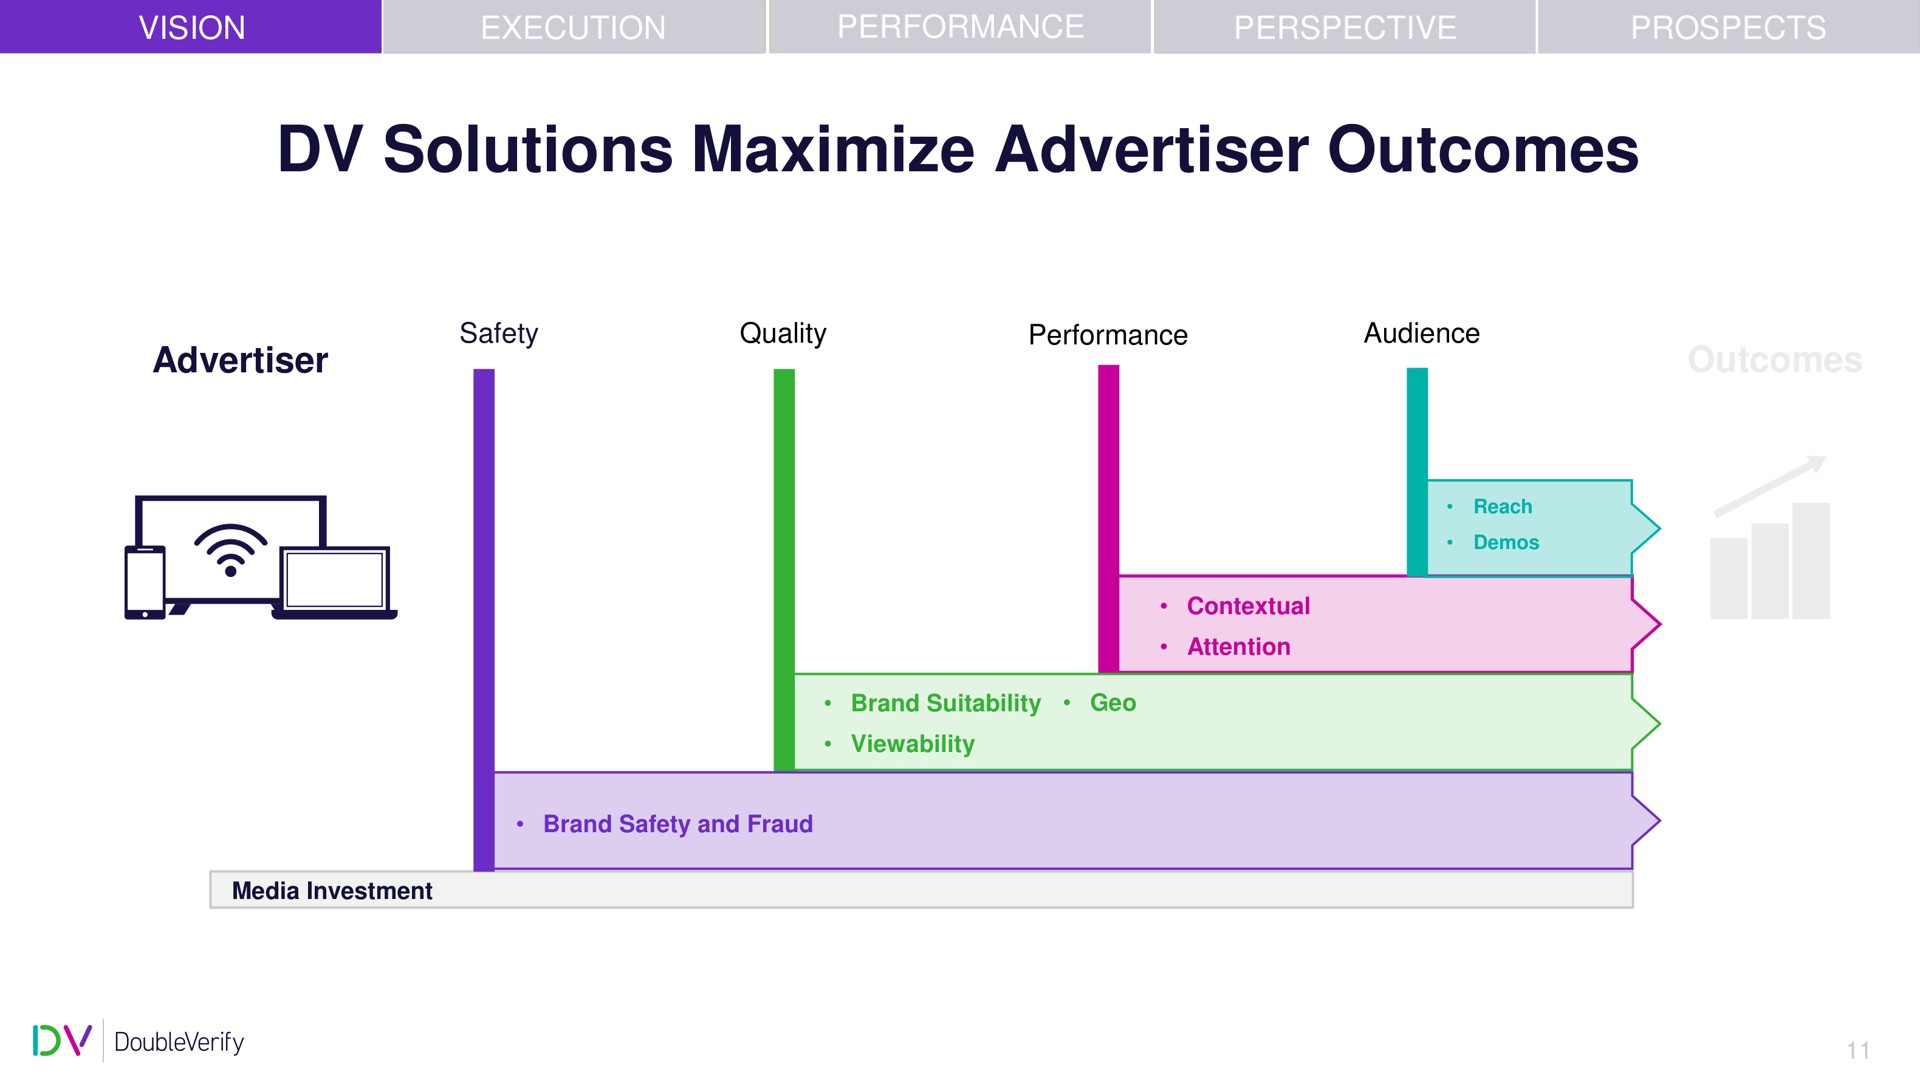 solutions maximize advertiser outcomes accreditation point solutions attribution challenges brand reputation suitability data portability | DoubleVerify